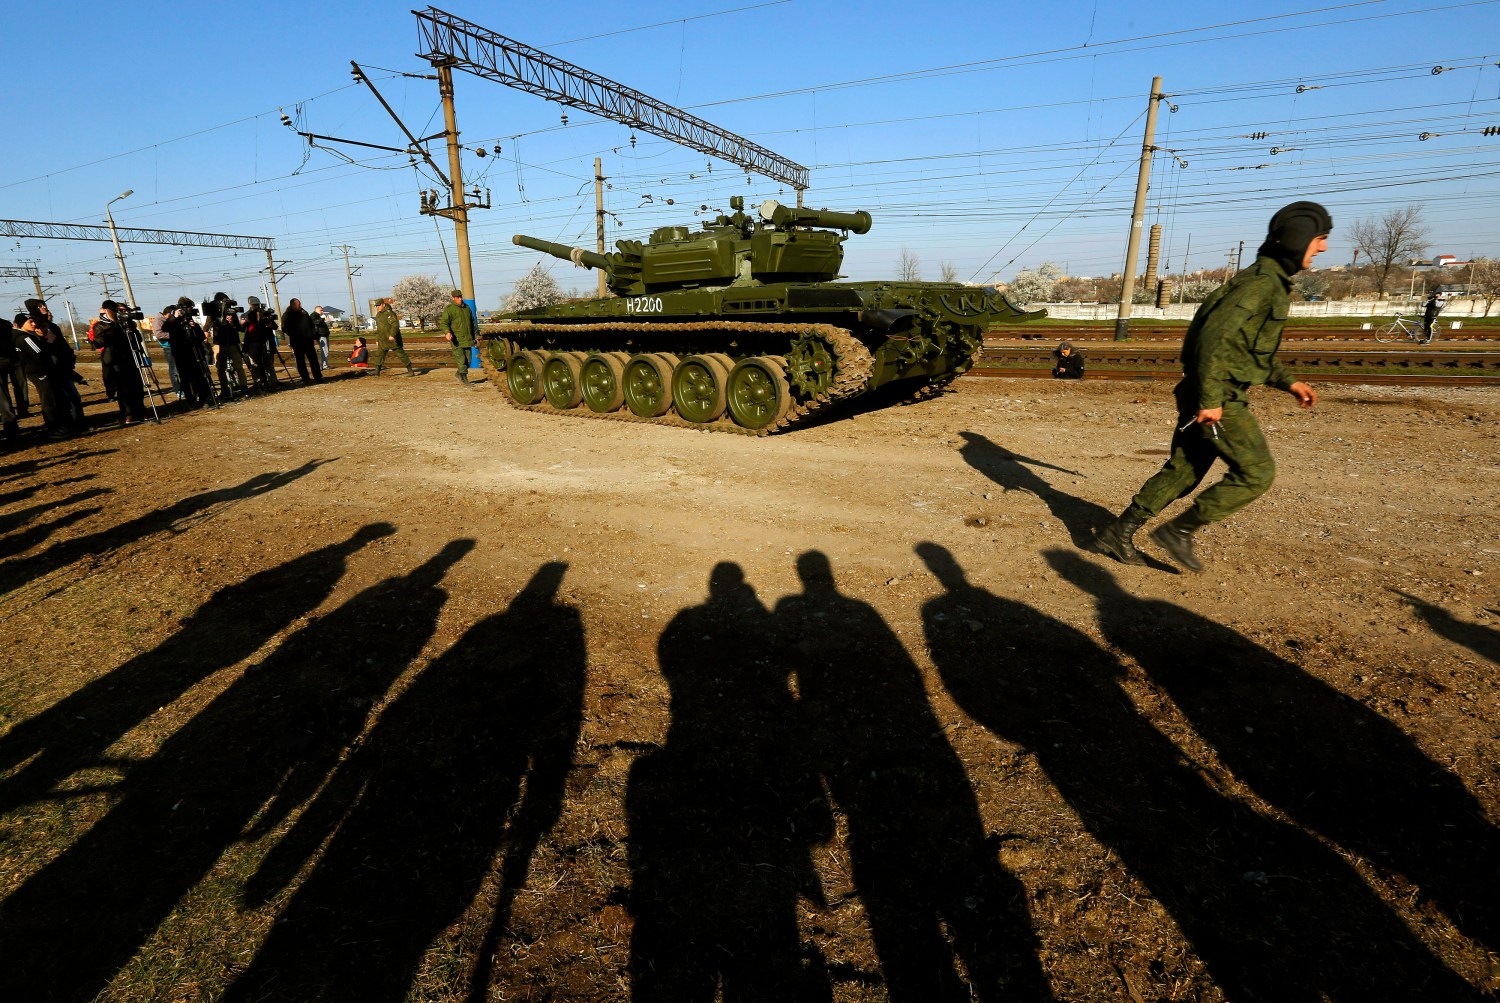 A Russian tank crew member runs in front of his T-72B tank after their arrival in Crimea in the settlement of Gvardeiskoye near the Crimean city of Simferopol March 31, 2014. Russia is withdrawing a motorized infantry battalion from a region near Ukraine's eastern border, the Russian Defence Ministry was quoted as saying by state news agencies on Monday. REUTERS/Yannis Behrakis (UKRAINE - Tags: POLITICS CONFLICT TPX IMAGES OF THE DAY) - RTR3JCY3